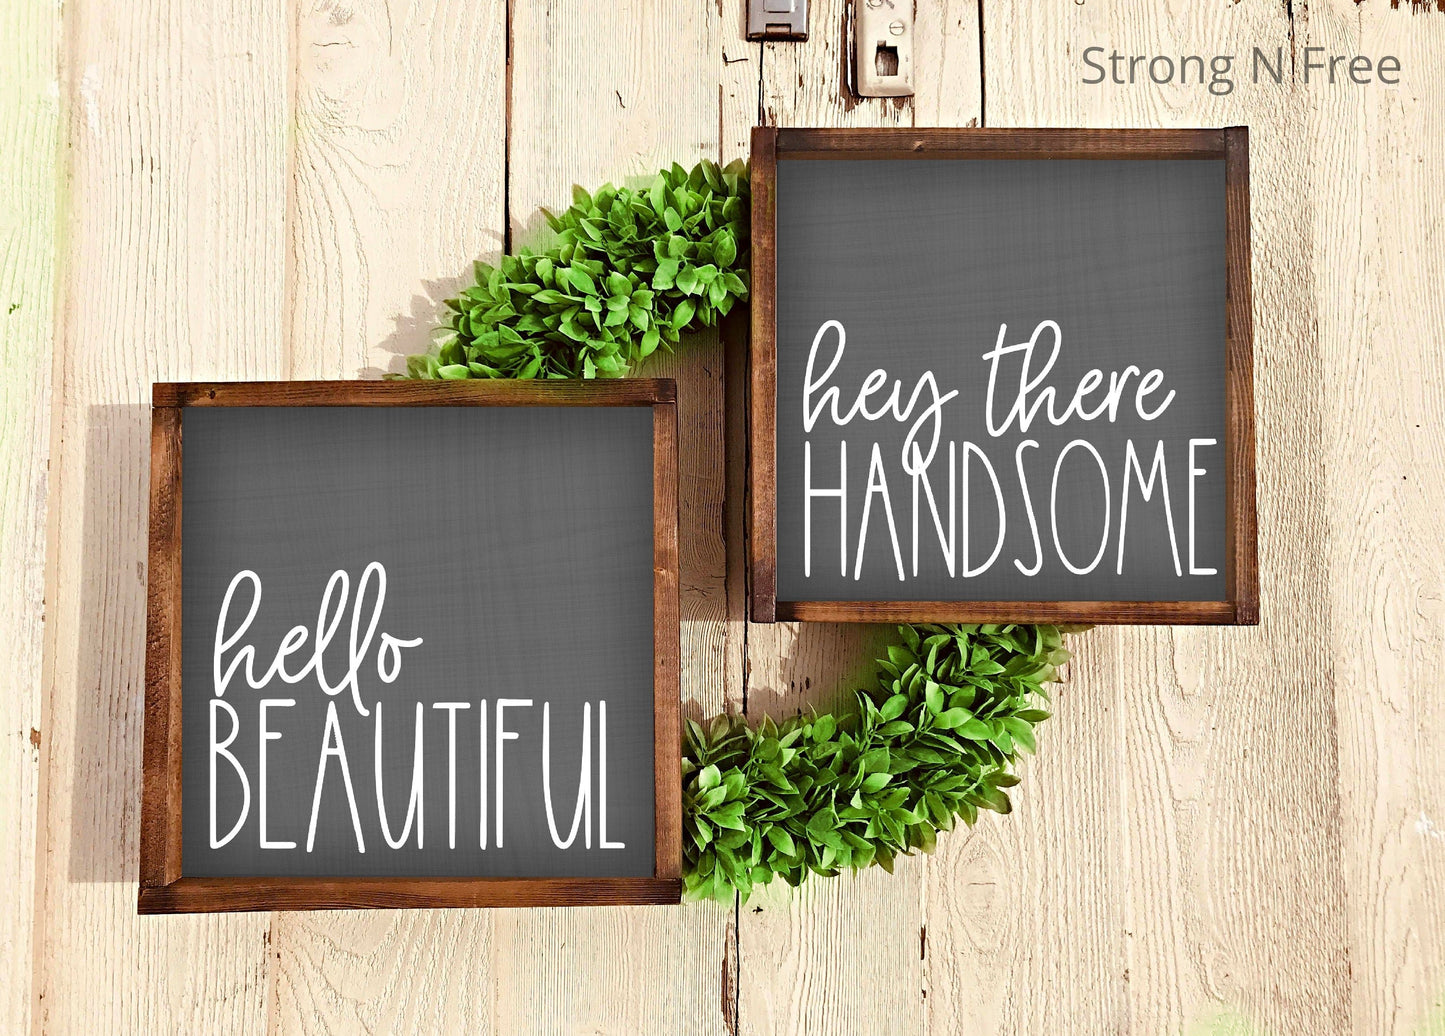 Good Morning Beautiful Hello There Handsome Sign Set - Wood Signs - Wood Signs For Home Decor - Farmhouse Signs - Farmhouse Decor